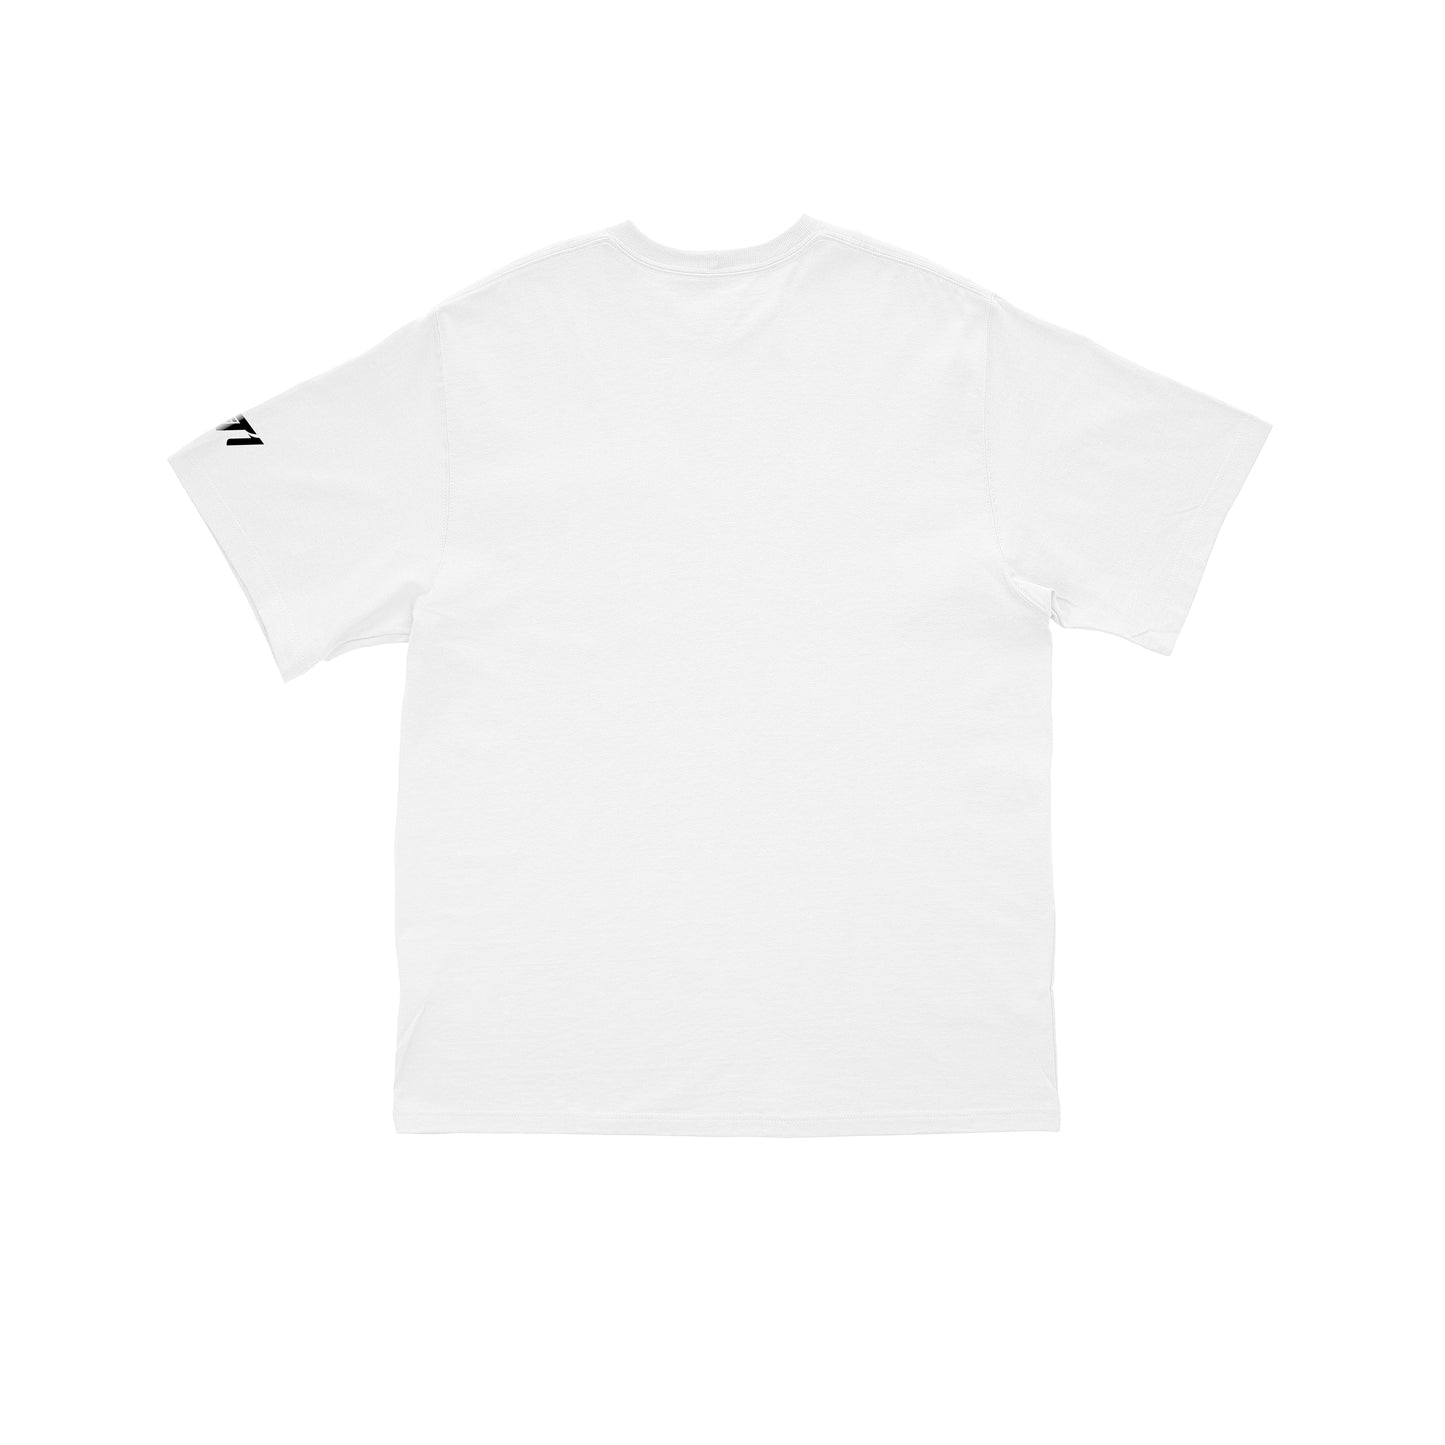 Front Together AS 1 T-shirt / White